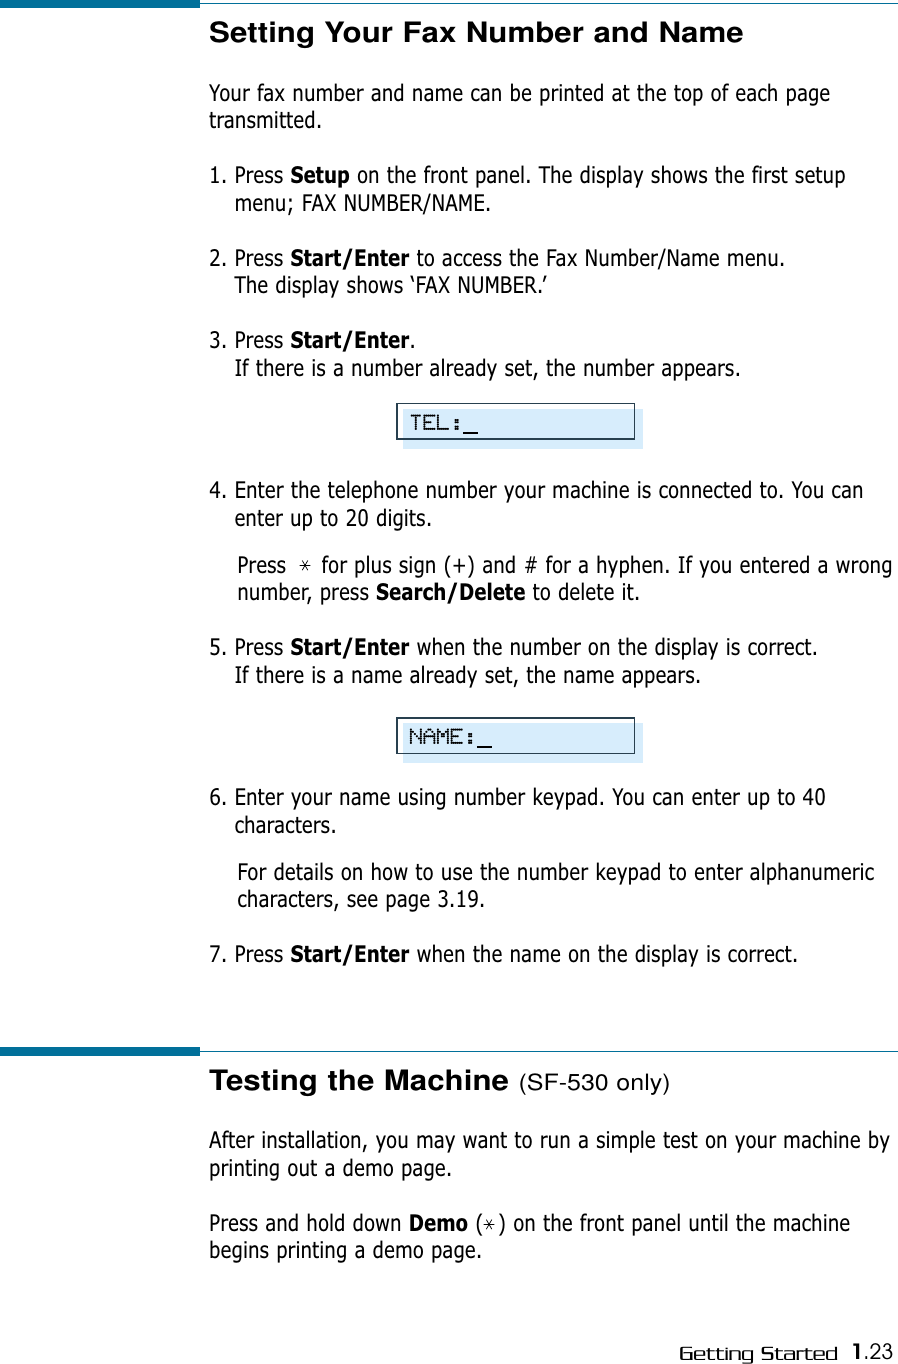 1.23Getting StartedSetting Your Fax Number and NameYour fax number and name can be printed at the top of each pagetransmitted. 1. Press Setup on the front panel. The display shows the first setupmenu; FAX NUMBER/NAME.2. Press Start/Enter to access the Fax Number/Name menu.The display shows ‘FAX NUMBER.’   3. Press Start/Enter.If there is a number already set, the number appears.4. Enter the telephone number your machine is connected to. You canenter up to 20 digits.Press     for plus sign (+) and # for a hyphen. If you entered a wrongnumber, press Search/Delete to delete it.5. Press Start/Enter when the number on the display is correct. If there is a name already set, the name appears.6. Enter your name using number keypad. You can enter up to 40characters.For details on how to use the number keypad to enter alphanumericcharacters, see page 3.19.7. Press Start/Enter when the name on the display is correct.Testing the Machine (SF-530 only)After installation, you may want to run a simple test on your machine byprinting out a demo page.Press and hold down Demo (  ) on the front panel until the machinebegins printing a demo page.TEL:NAME: